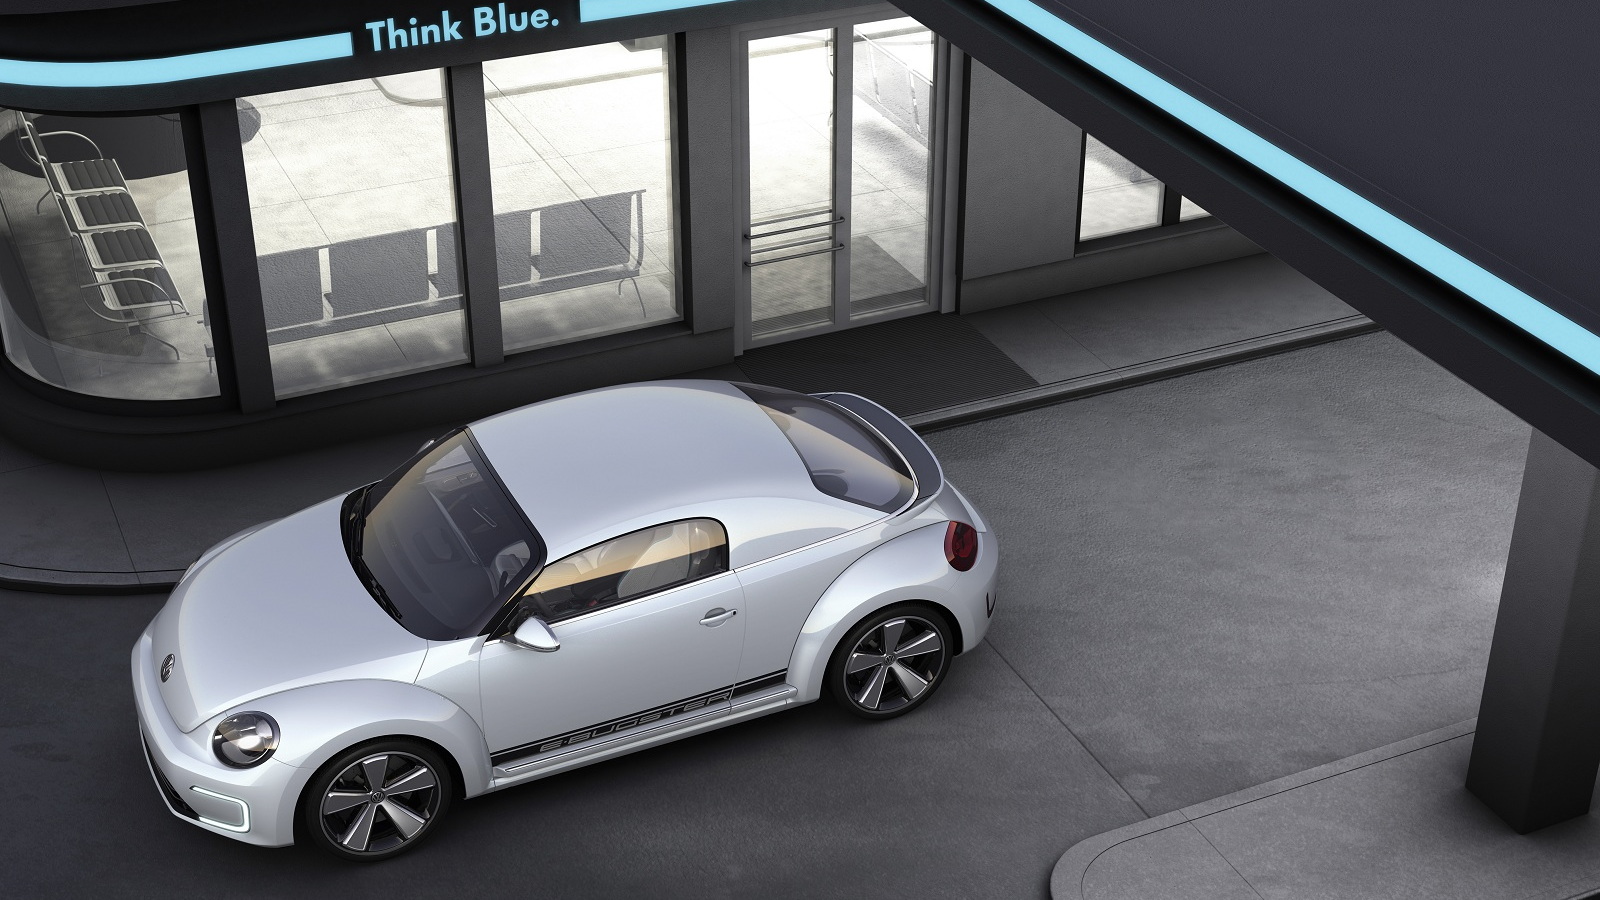 Volkswagen E-Bugster Concept electric two-seat coupe, 2012 Detroit Auto Show